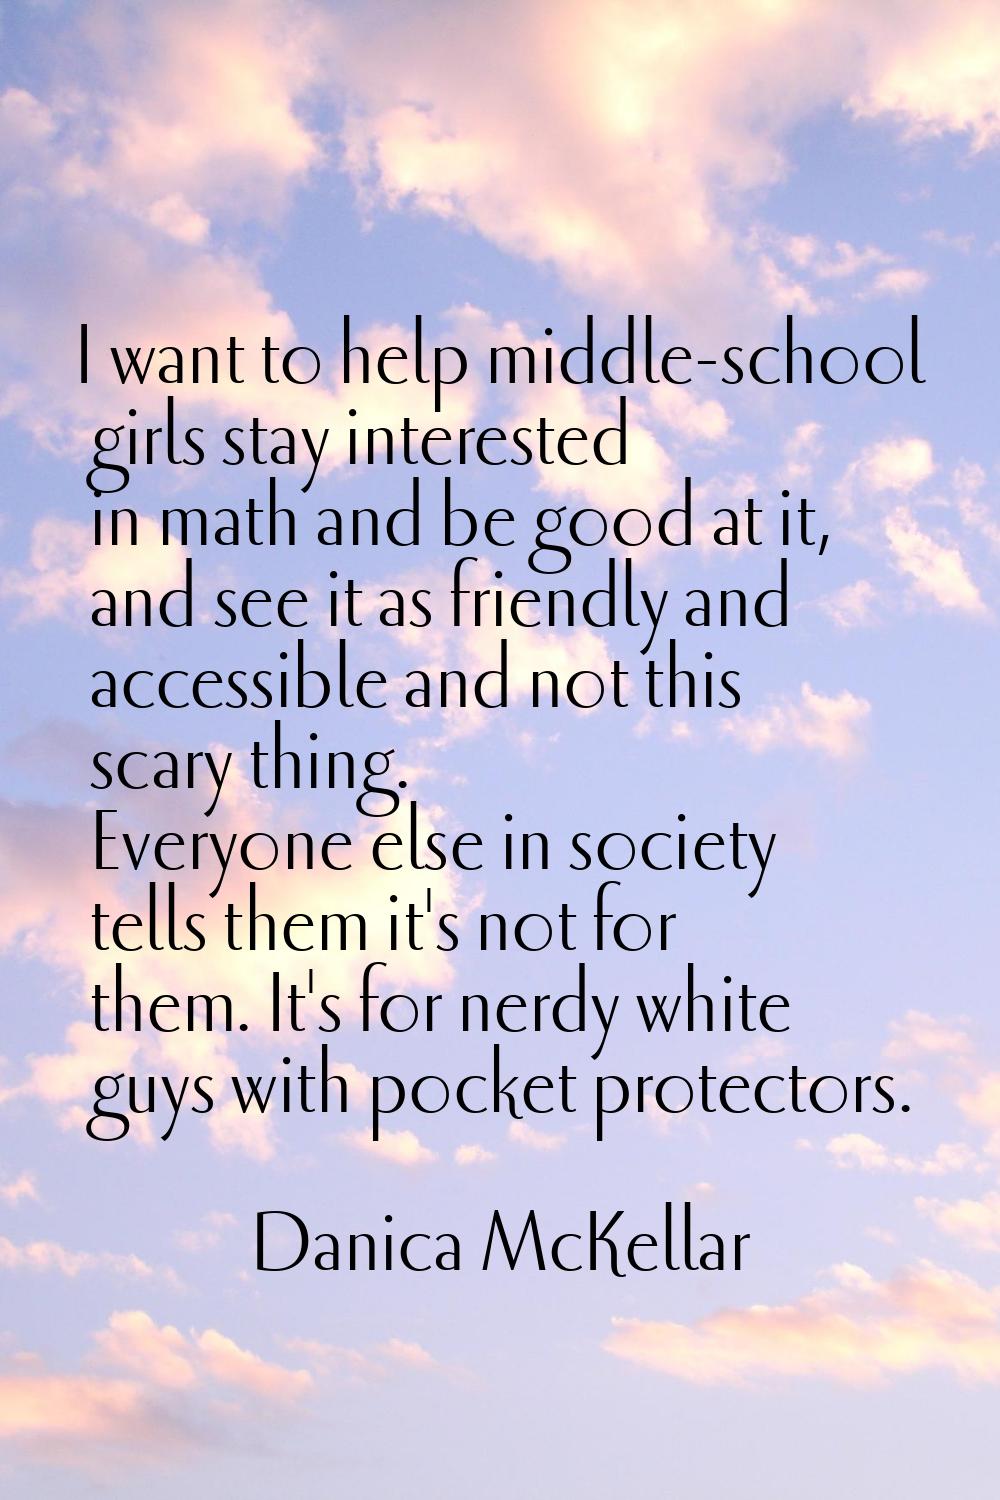 I want to help middle-school girls stay interested in math and be good at it, and see it as friendl